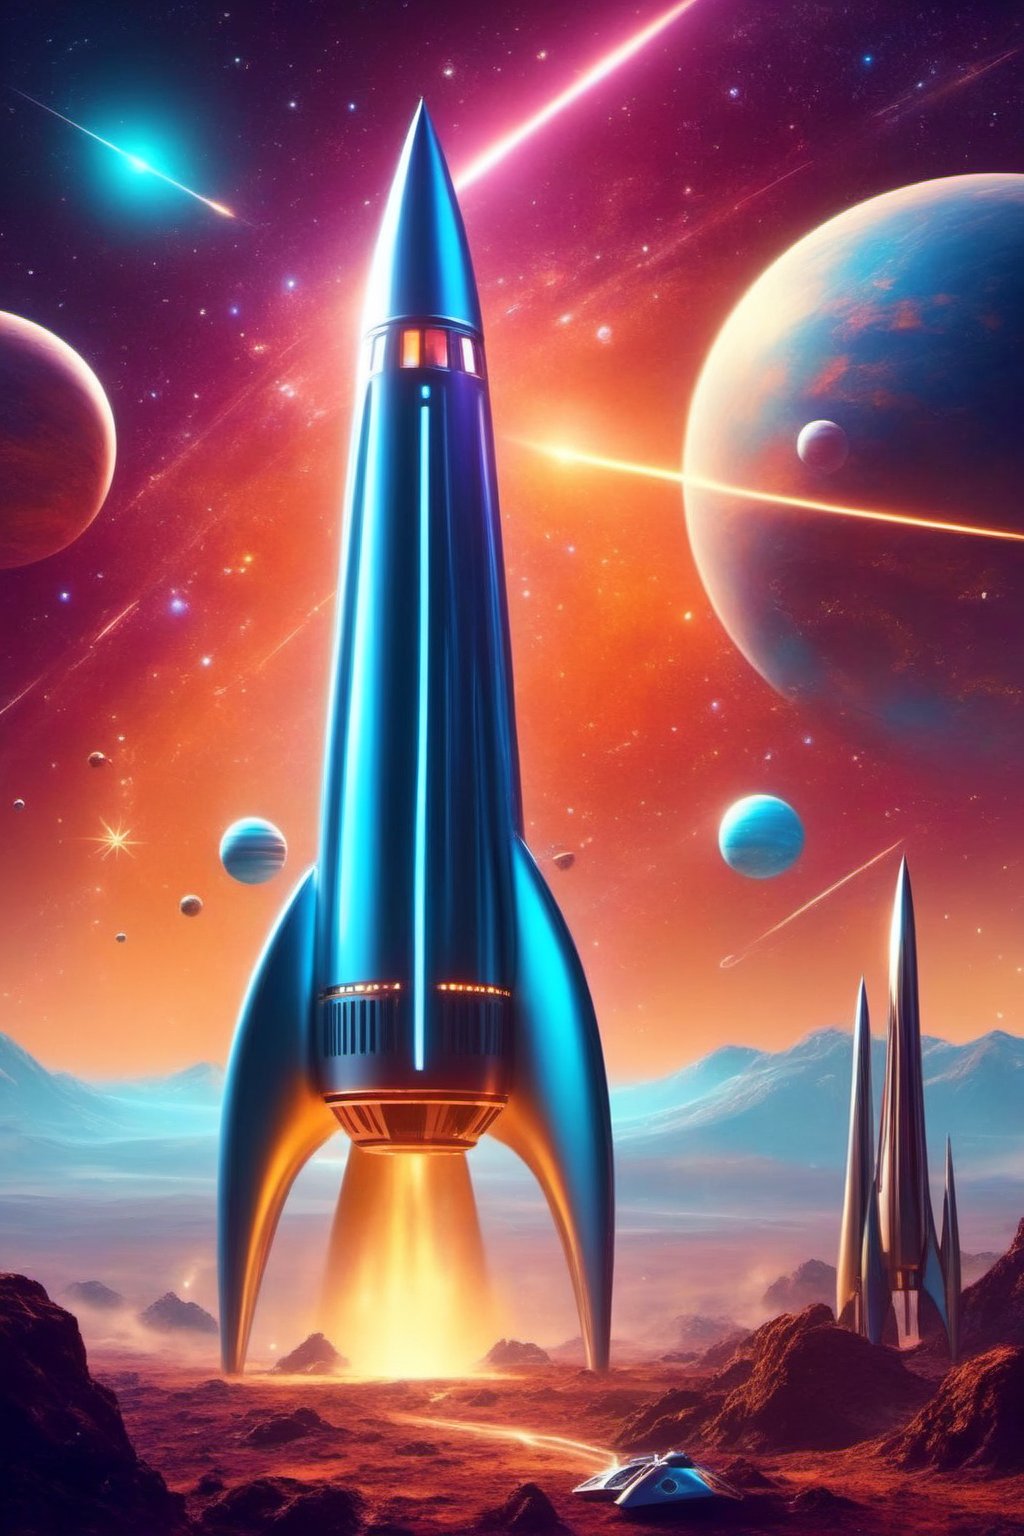 A galactic war scene in outer space filled with bright stars and distant planets. The spaceships involved in the conflict have a retro design inspired by 1950s aesthetics, with vibrant colors and classic streamlined shapes. I want the ships to have details like 1950s style fins, glass domes, and flashing lights. The battle unfolds with laser beams and spectacular explosions. The image should fuse the futuristic style of science fiction with the nostalgia of the vintage era.